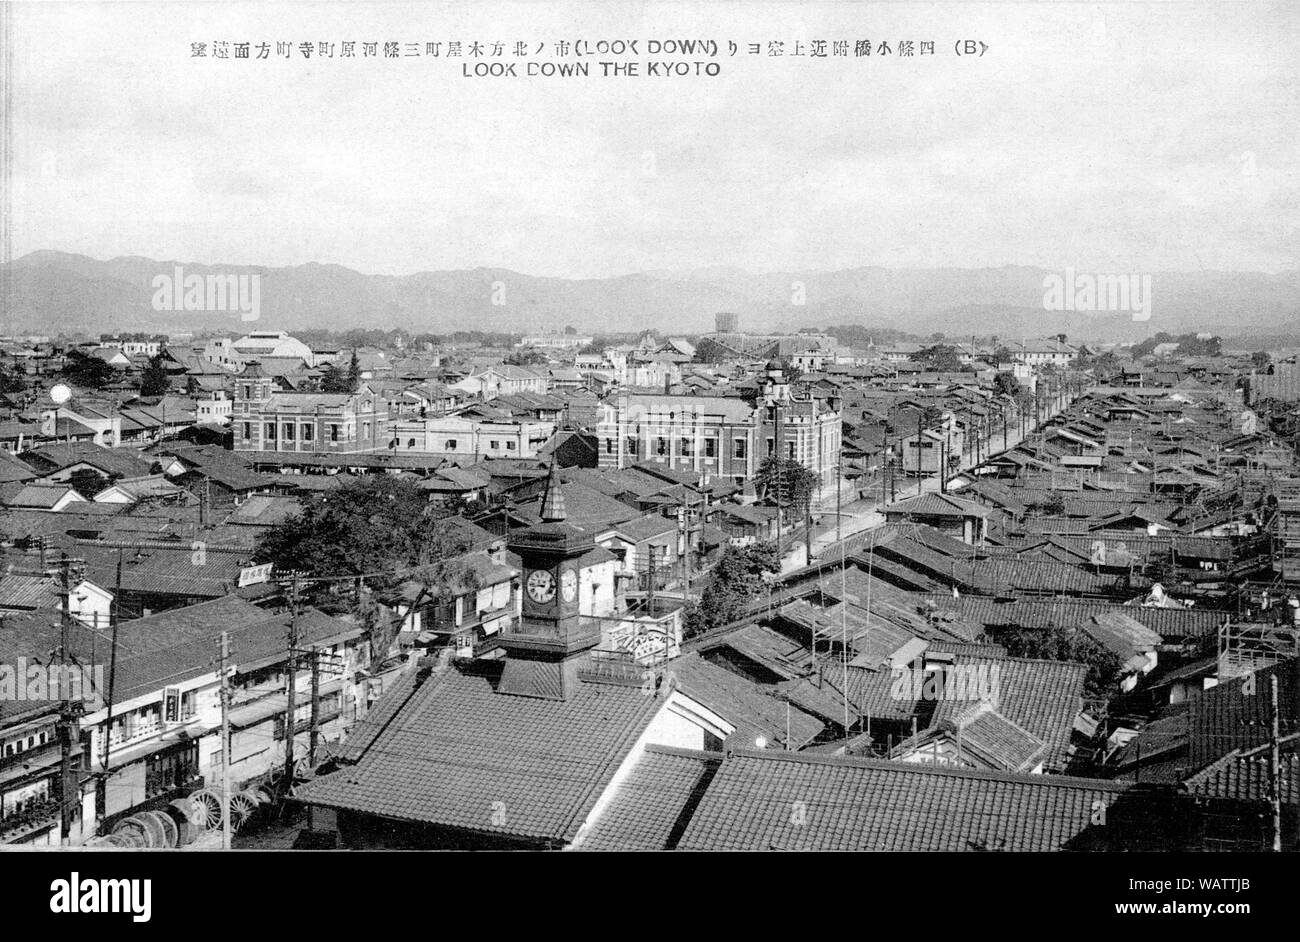 [ 1920s Japan - View on Kyoto ] —   Kiyamachi (木屋町) towards Sanjo Kawaramachi, as seen from a building nearby Shijo bridge.   The clock tower in front belonged to Murata Watch Shop (村田時計店) and was a famous landmark on Shijodori. The brick building in the very middle is the office of electric power corporation Kyoto Dento (京都電燈株式会社).   20th century vintage postcard. Stock Photo